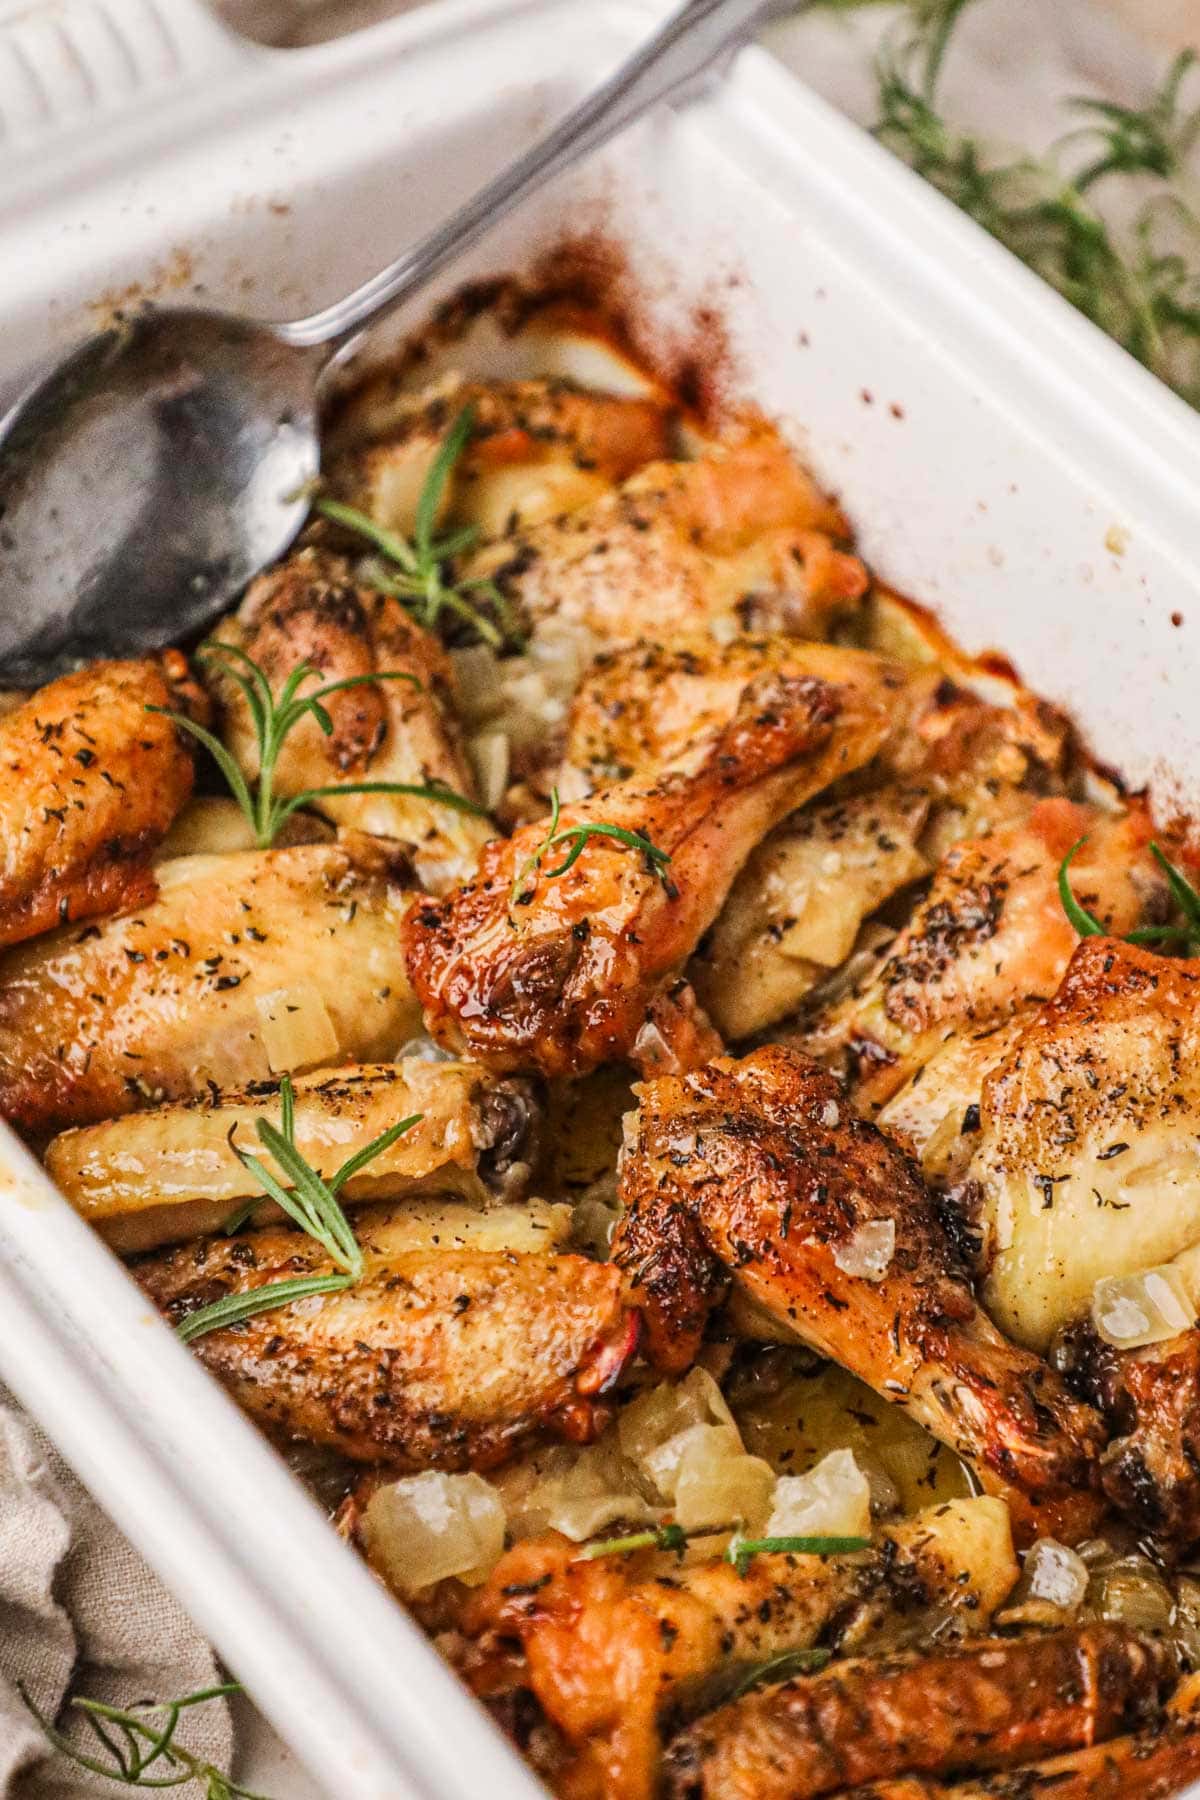 Baked Italian rosemary chicken wings with golden skin made with white wine and cooked on top of a bed of onions.